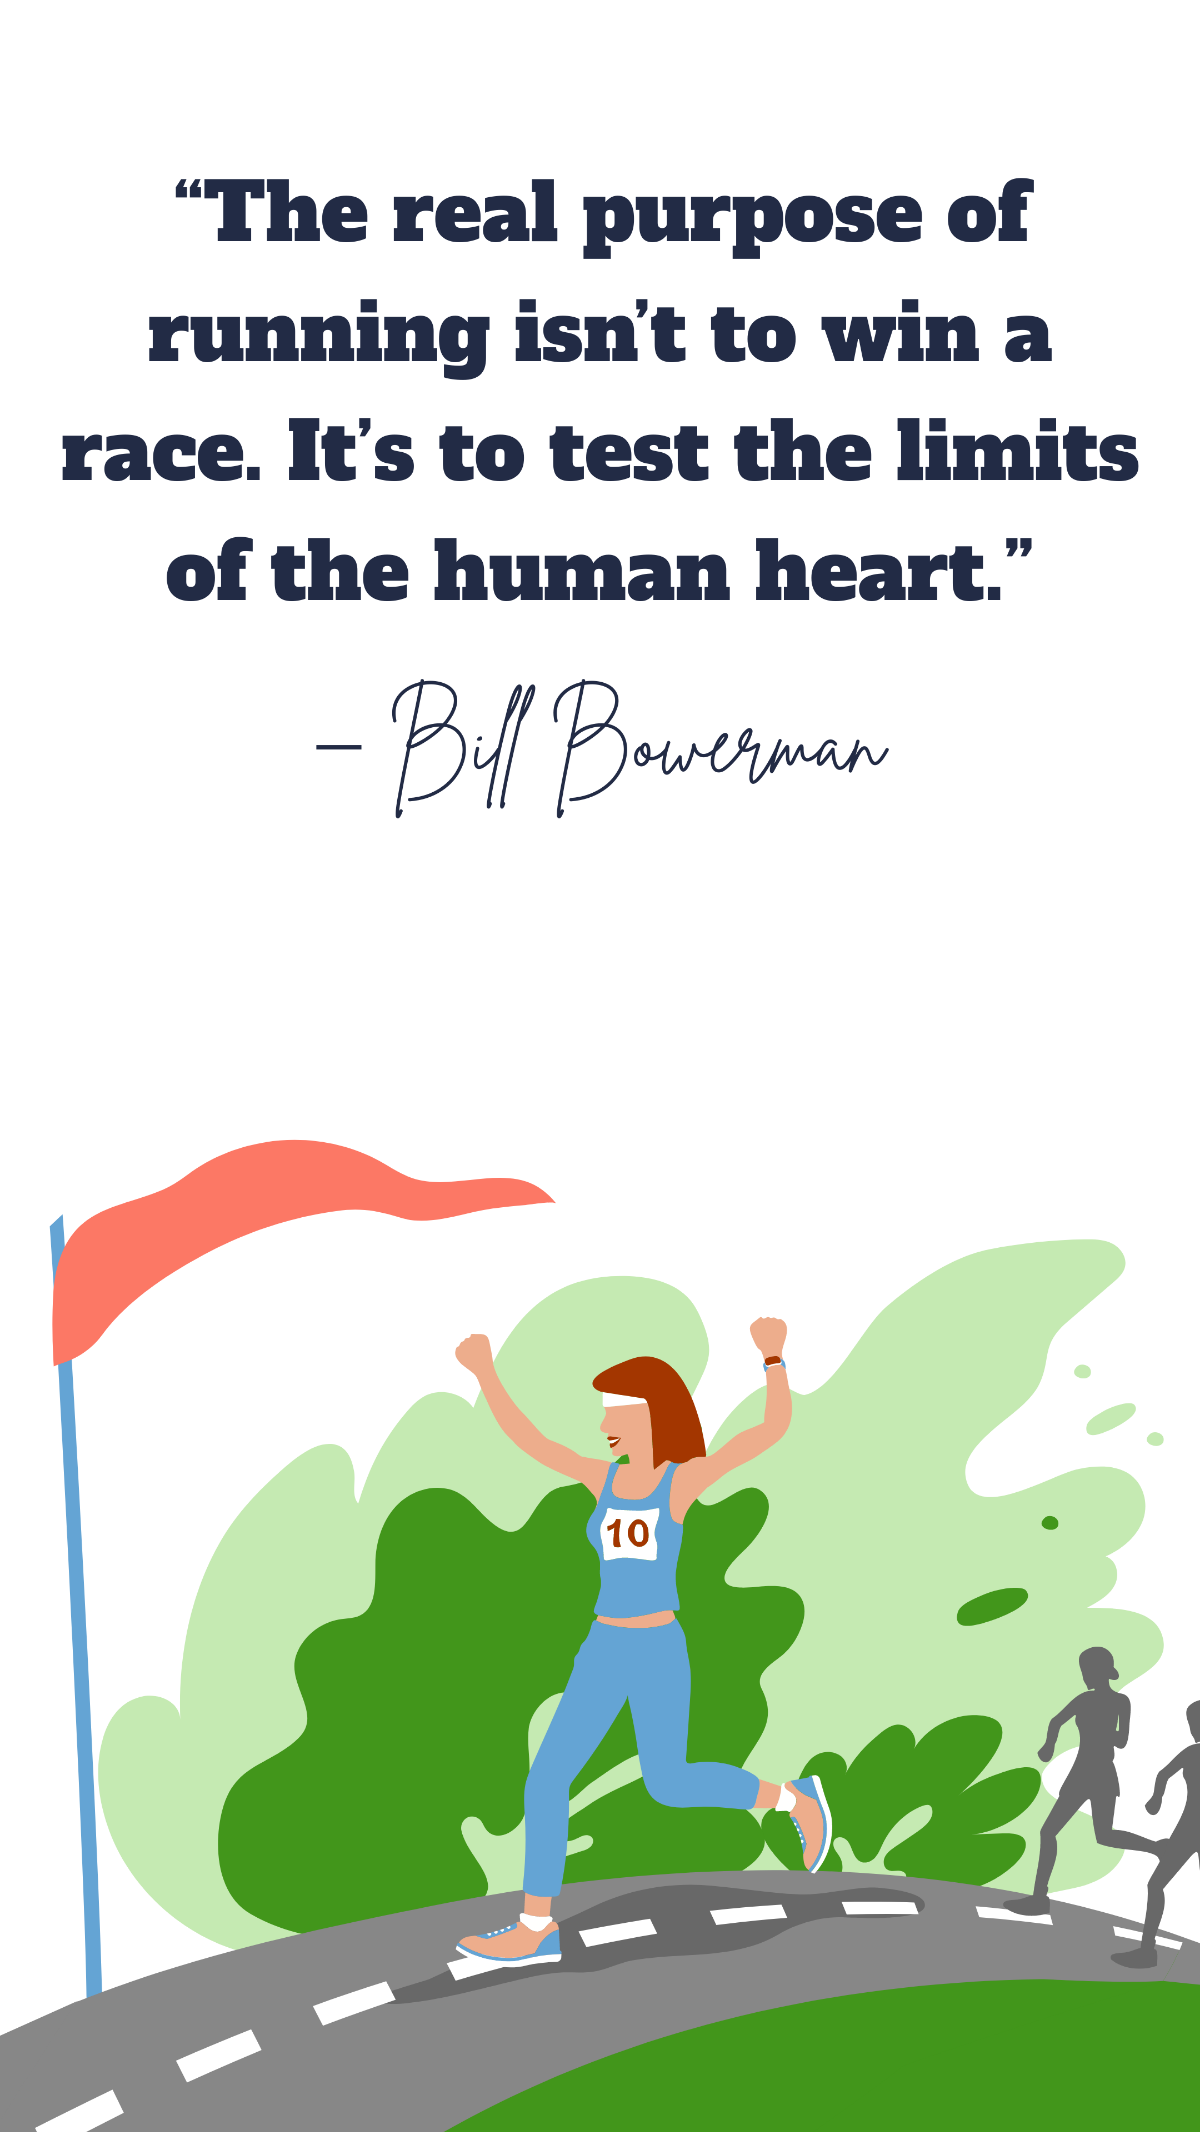 Bill Bowerman-The real purpose of running isn’t to win a race. It’s to test the limits of the human heart.